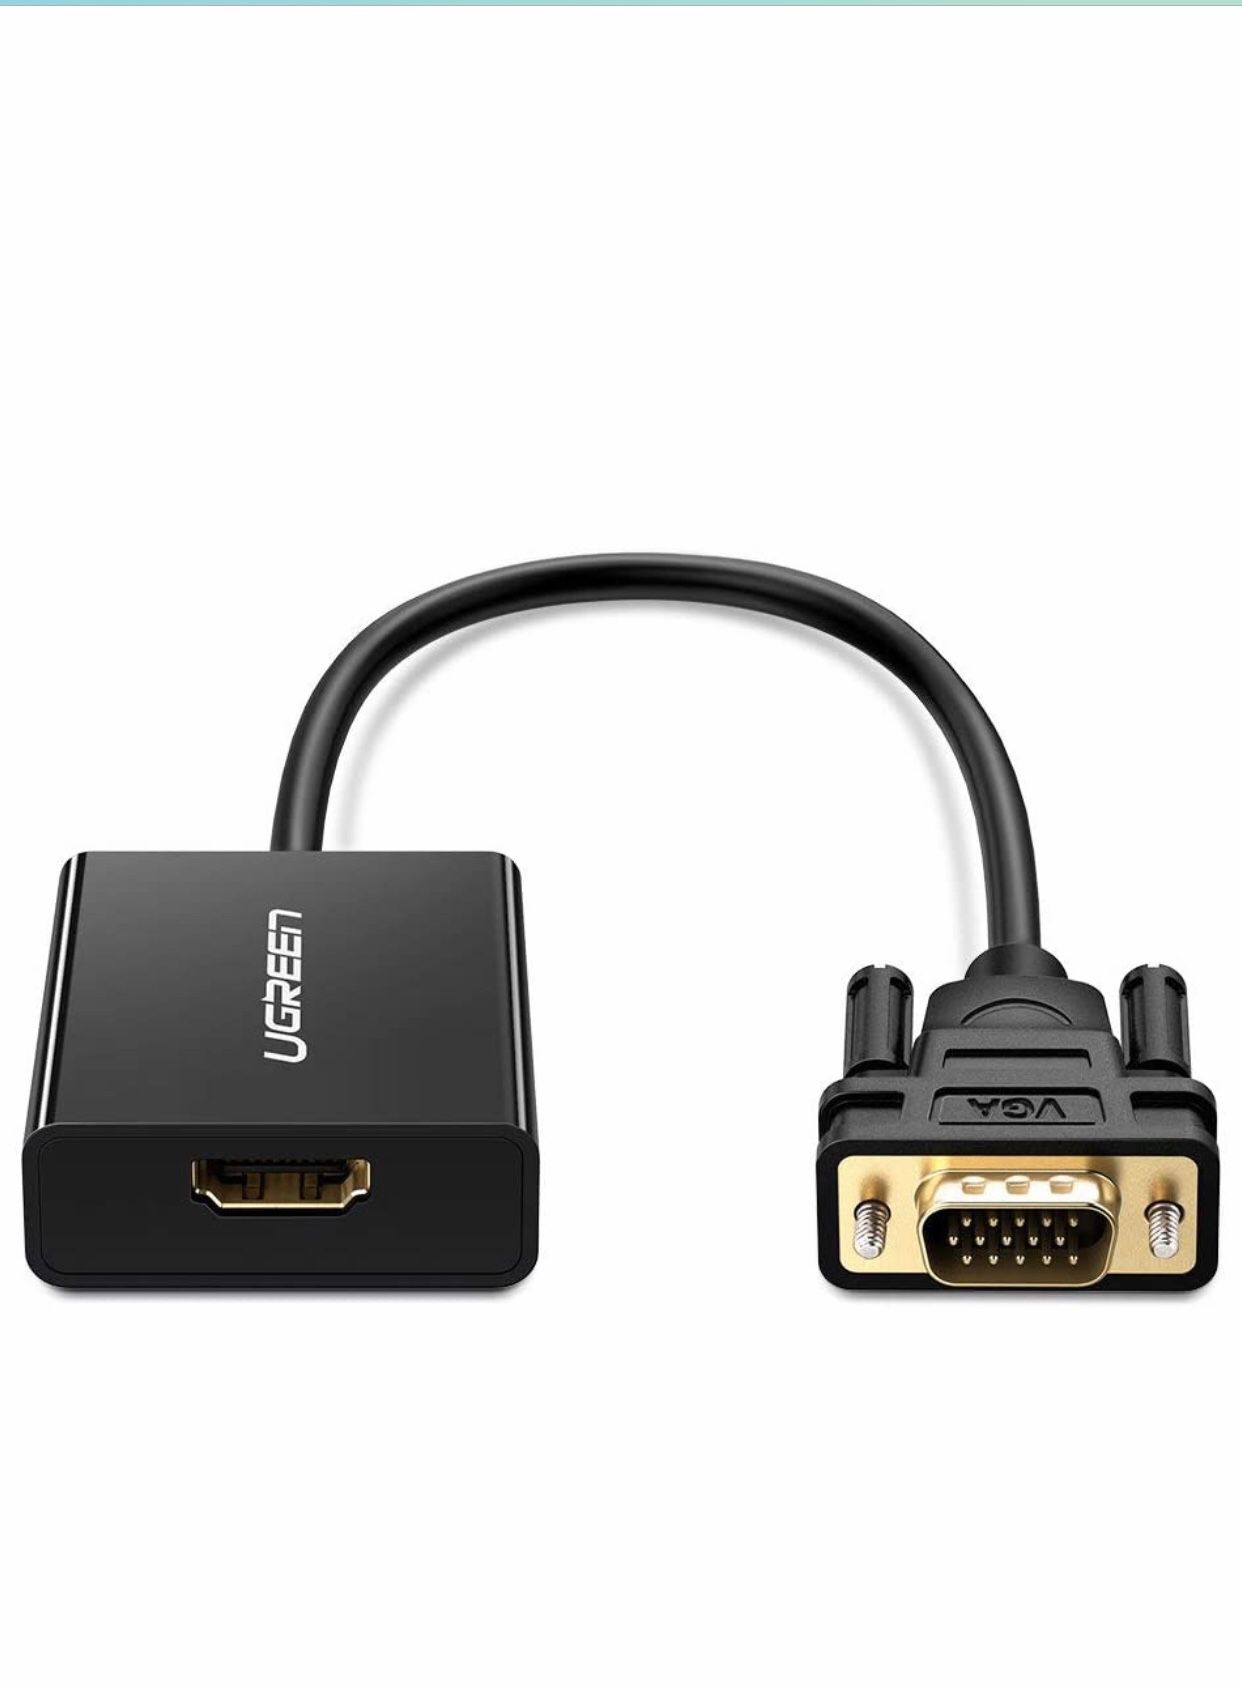 UGREEN Active HDMI to VGA Adapter with 3.5mm Audio Jack HDMI Female to VGA Male Converter